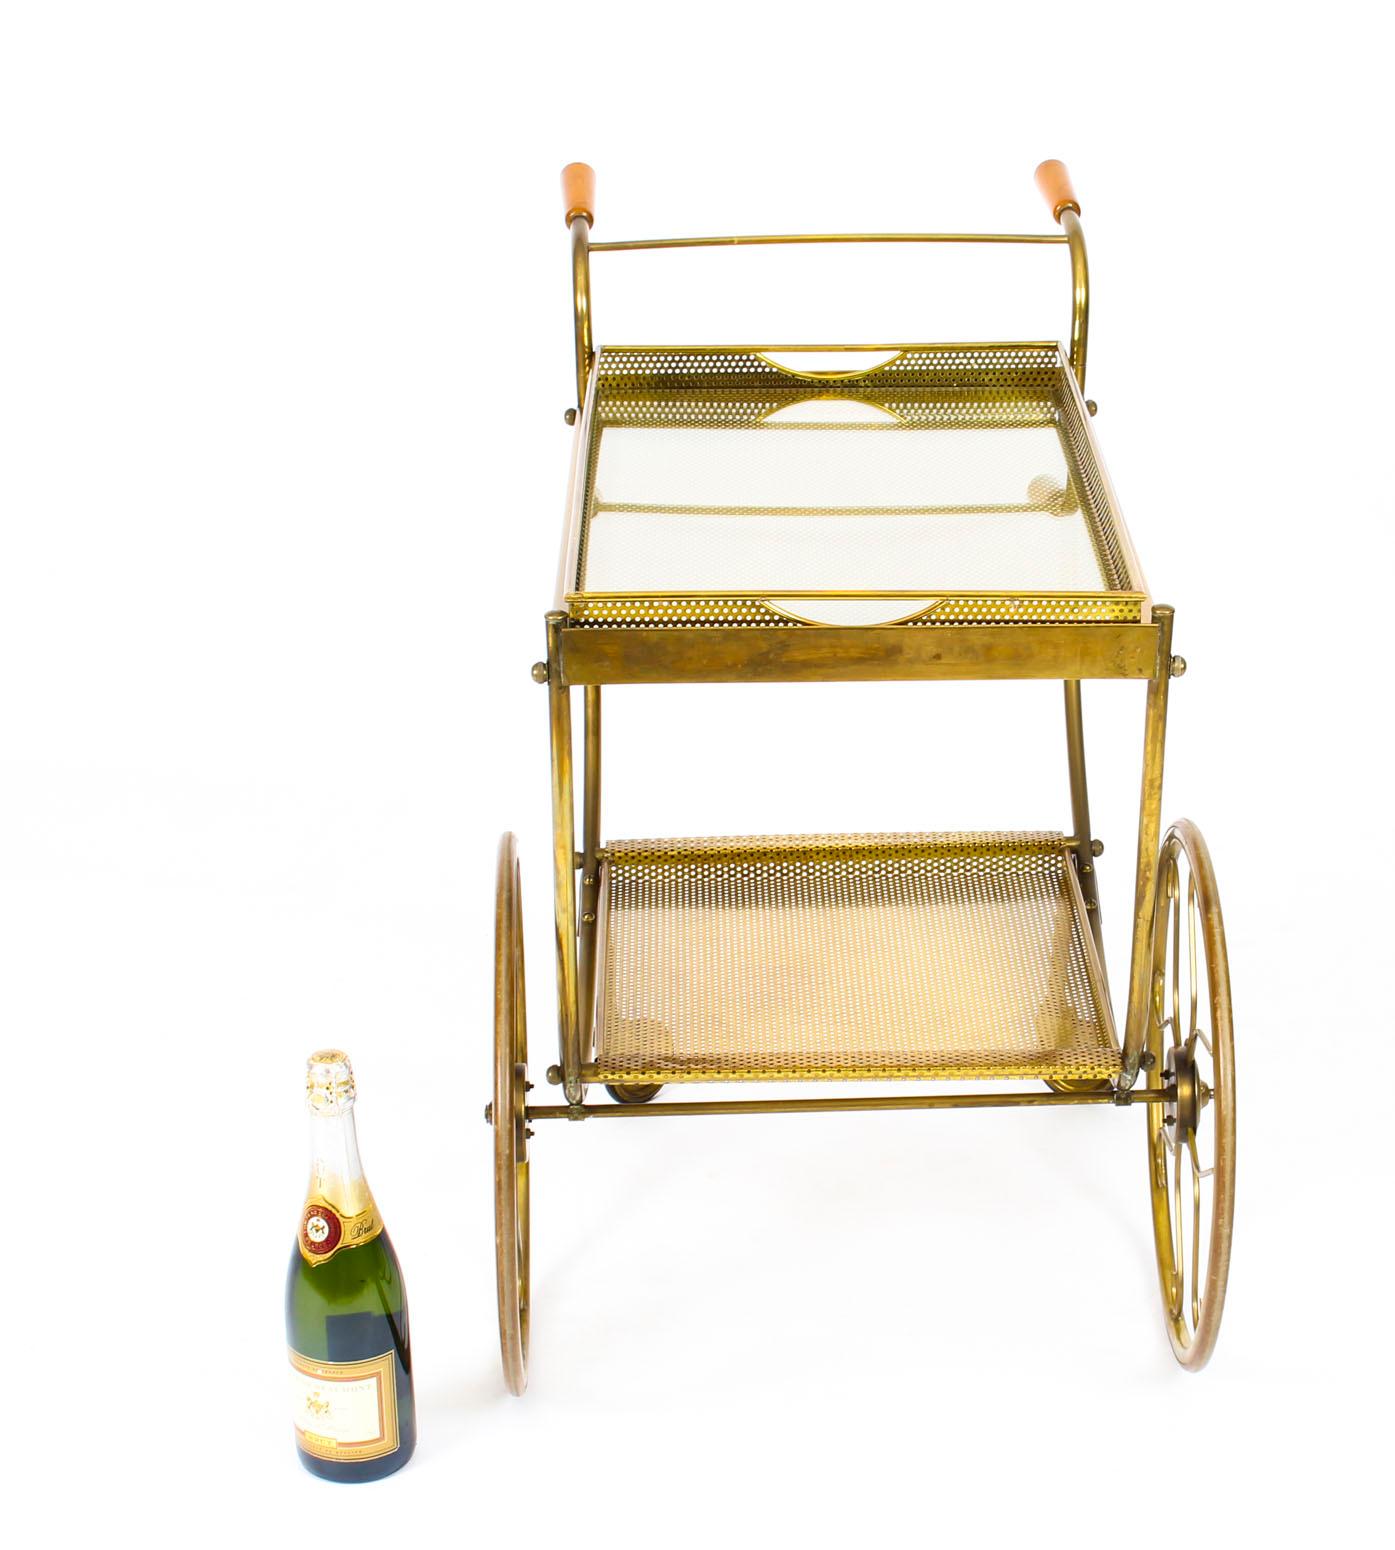 Antique French Modernist Gilded Drinks Serving Trolley, Midcentury 10